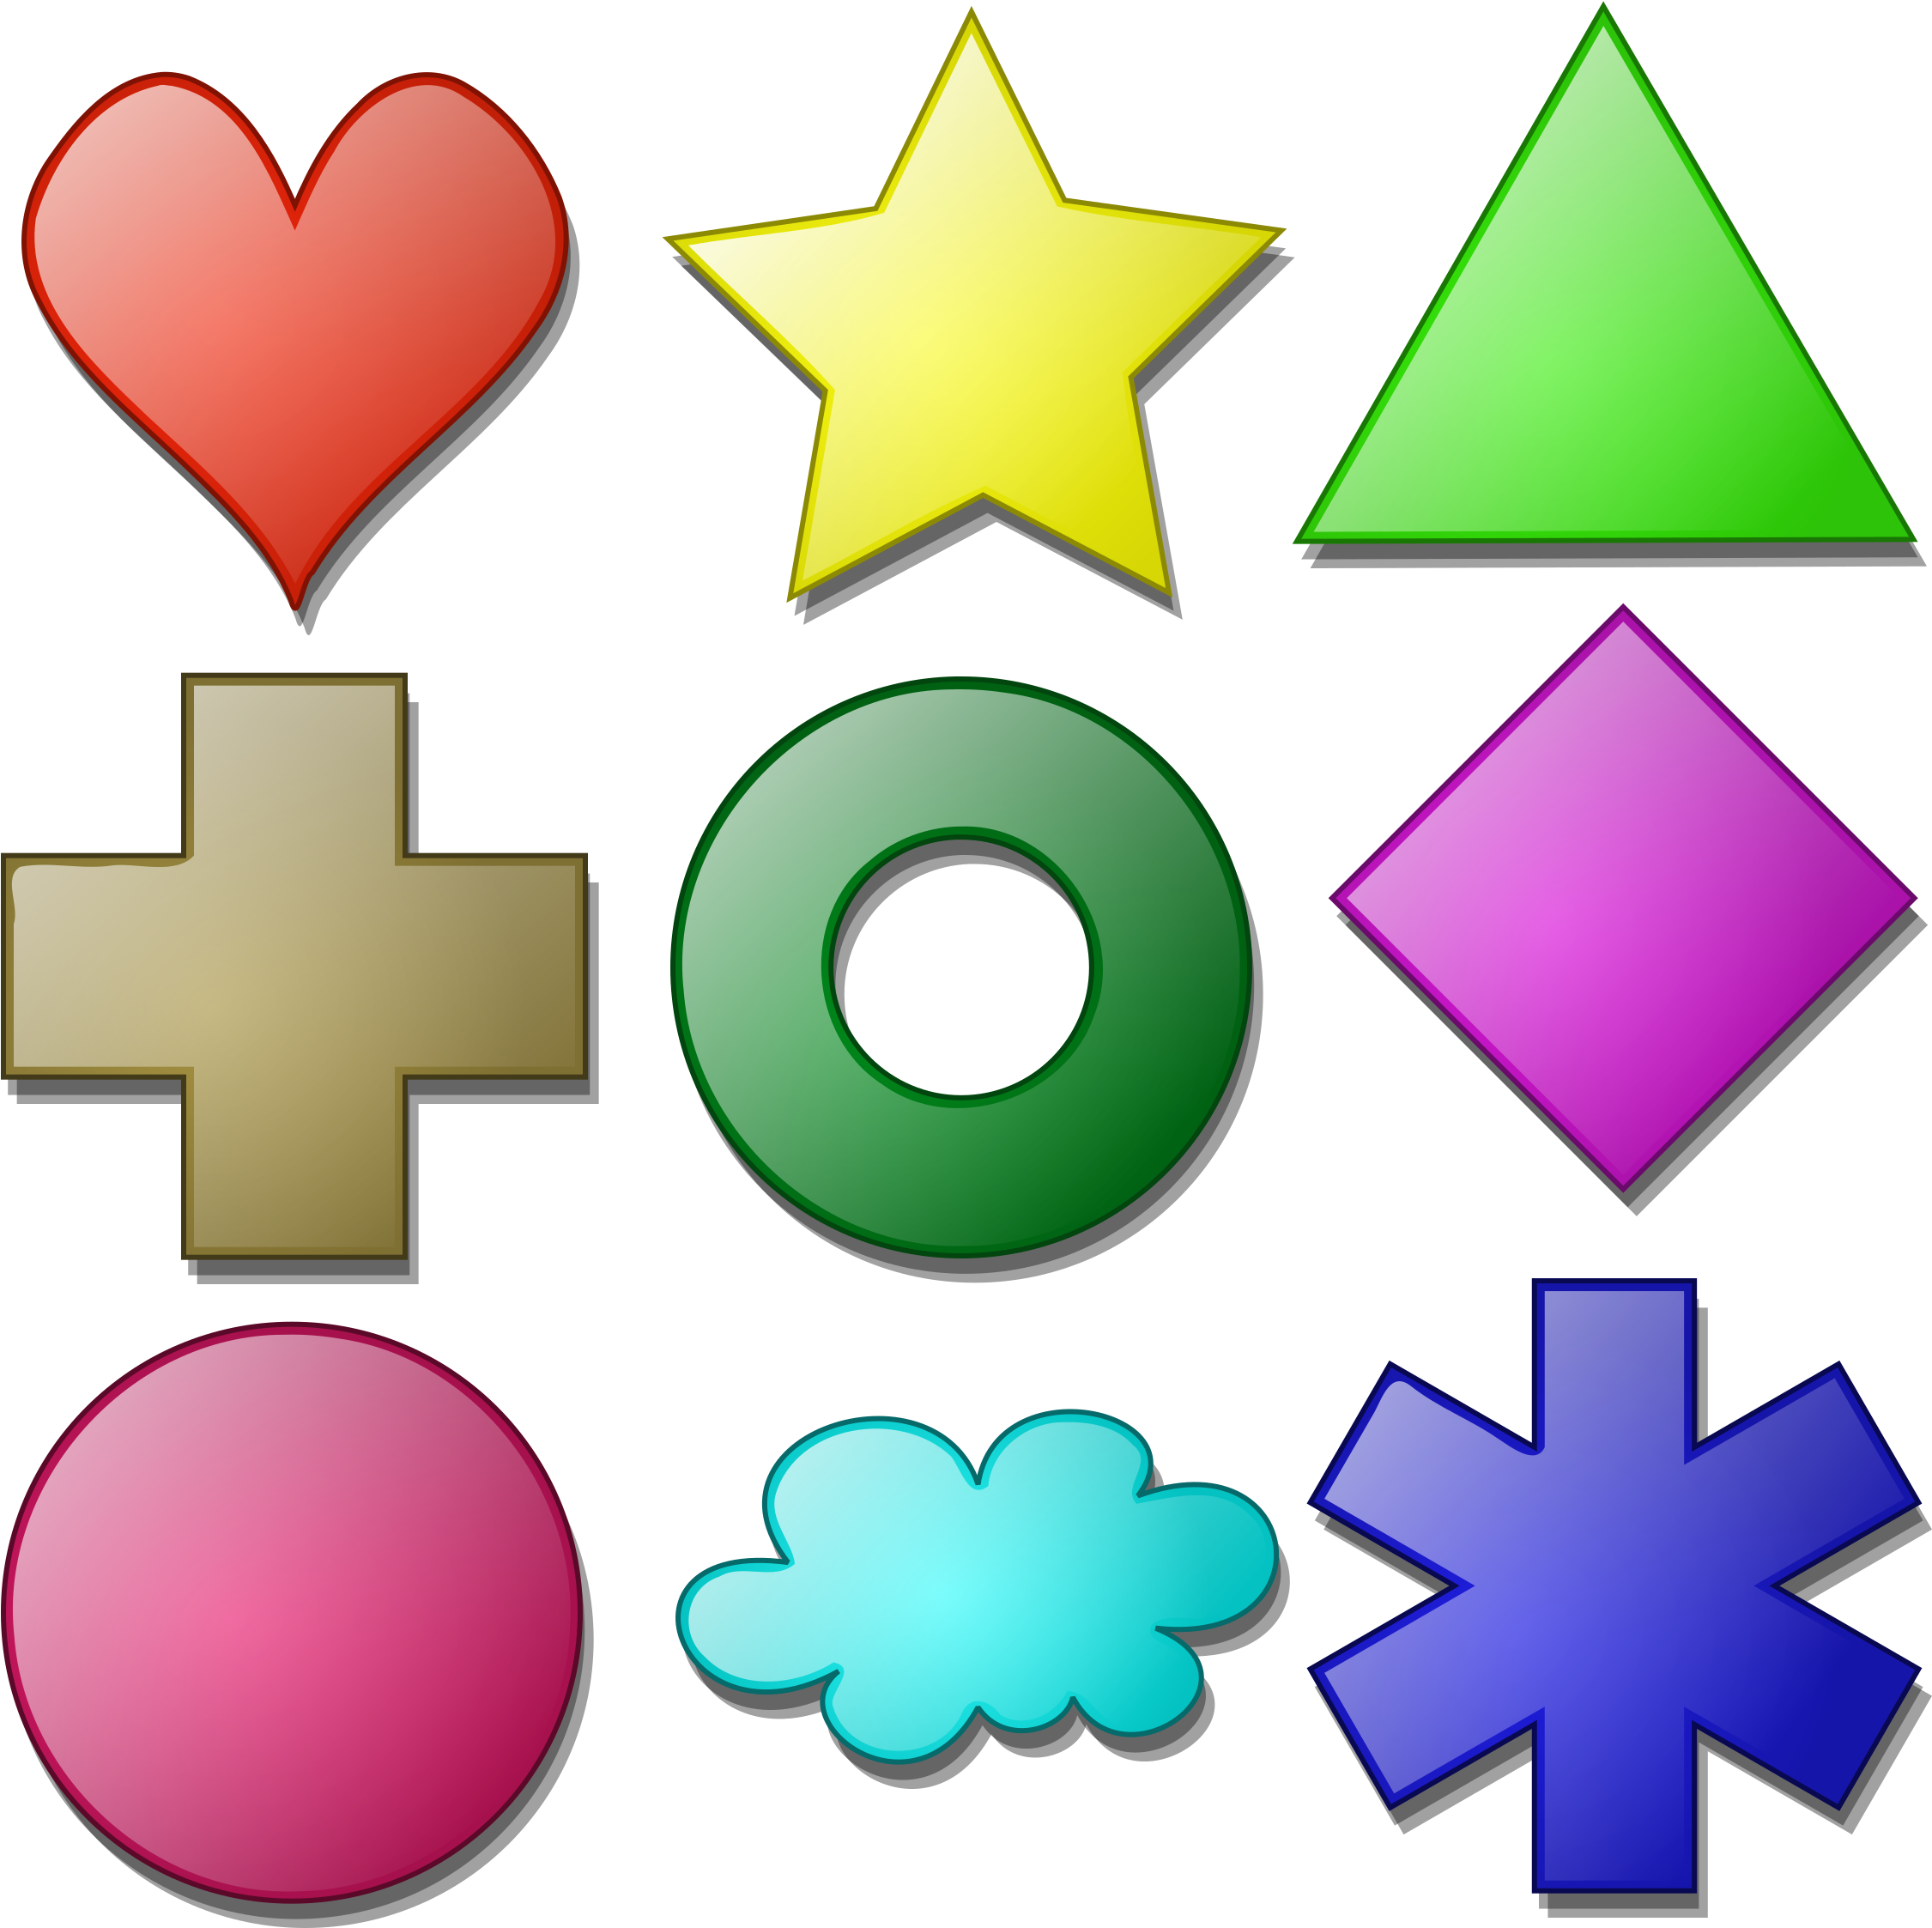 This Free Icons Png Design Of Game Marbles - Shapes Clip Art (2400x2400)